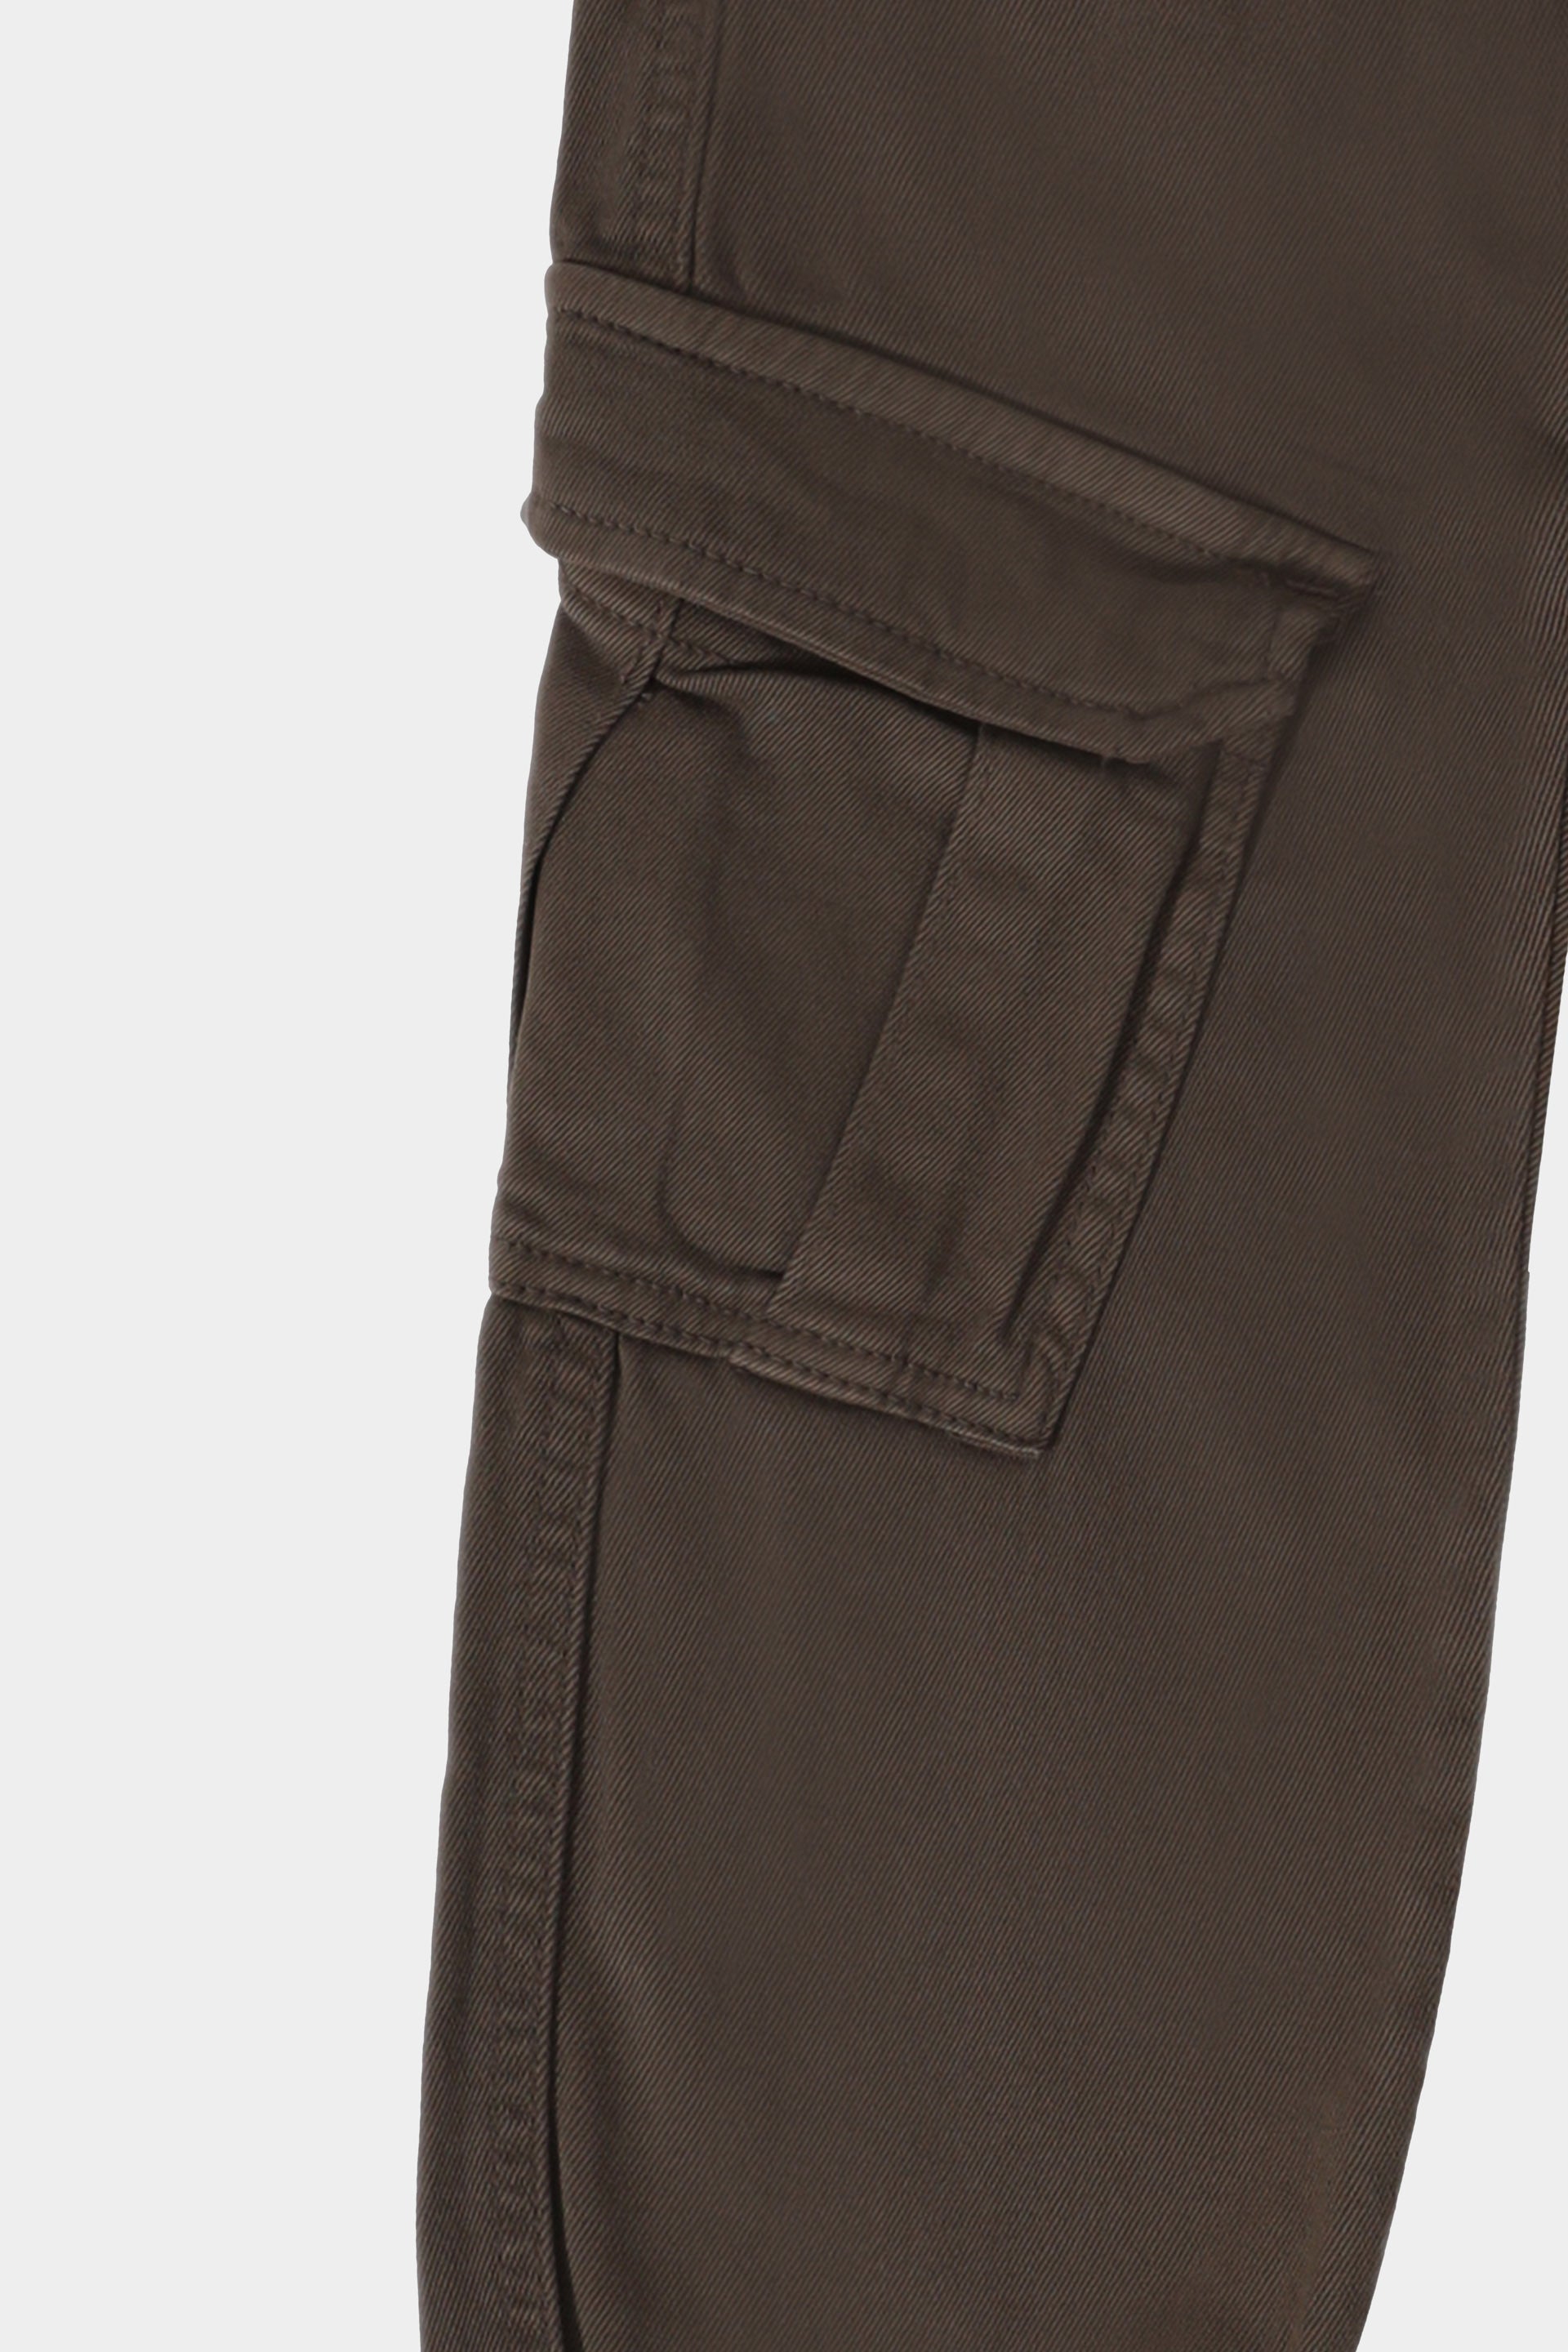 Tan Slim Fit Pull On Cargo Trousers | Men | George at ASDA